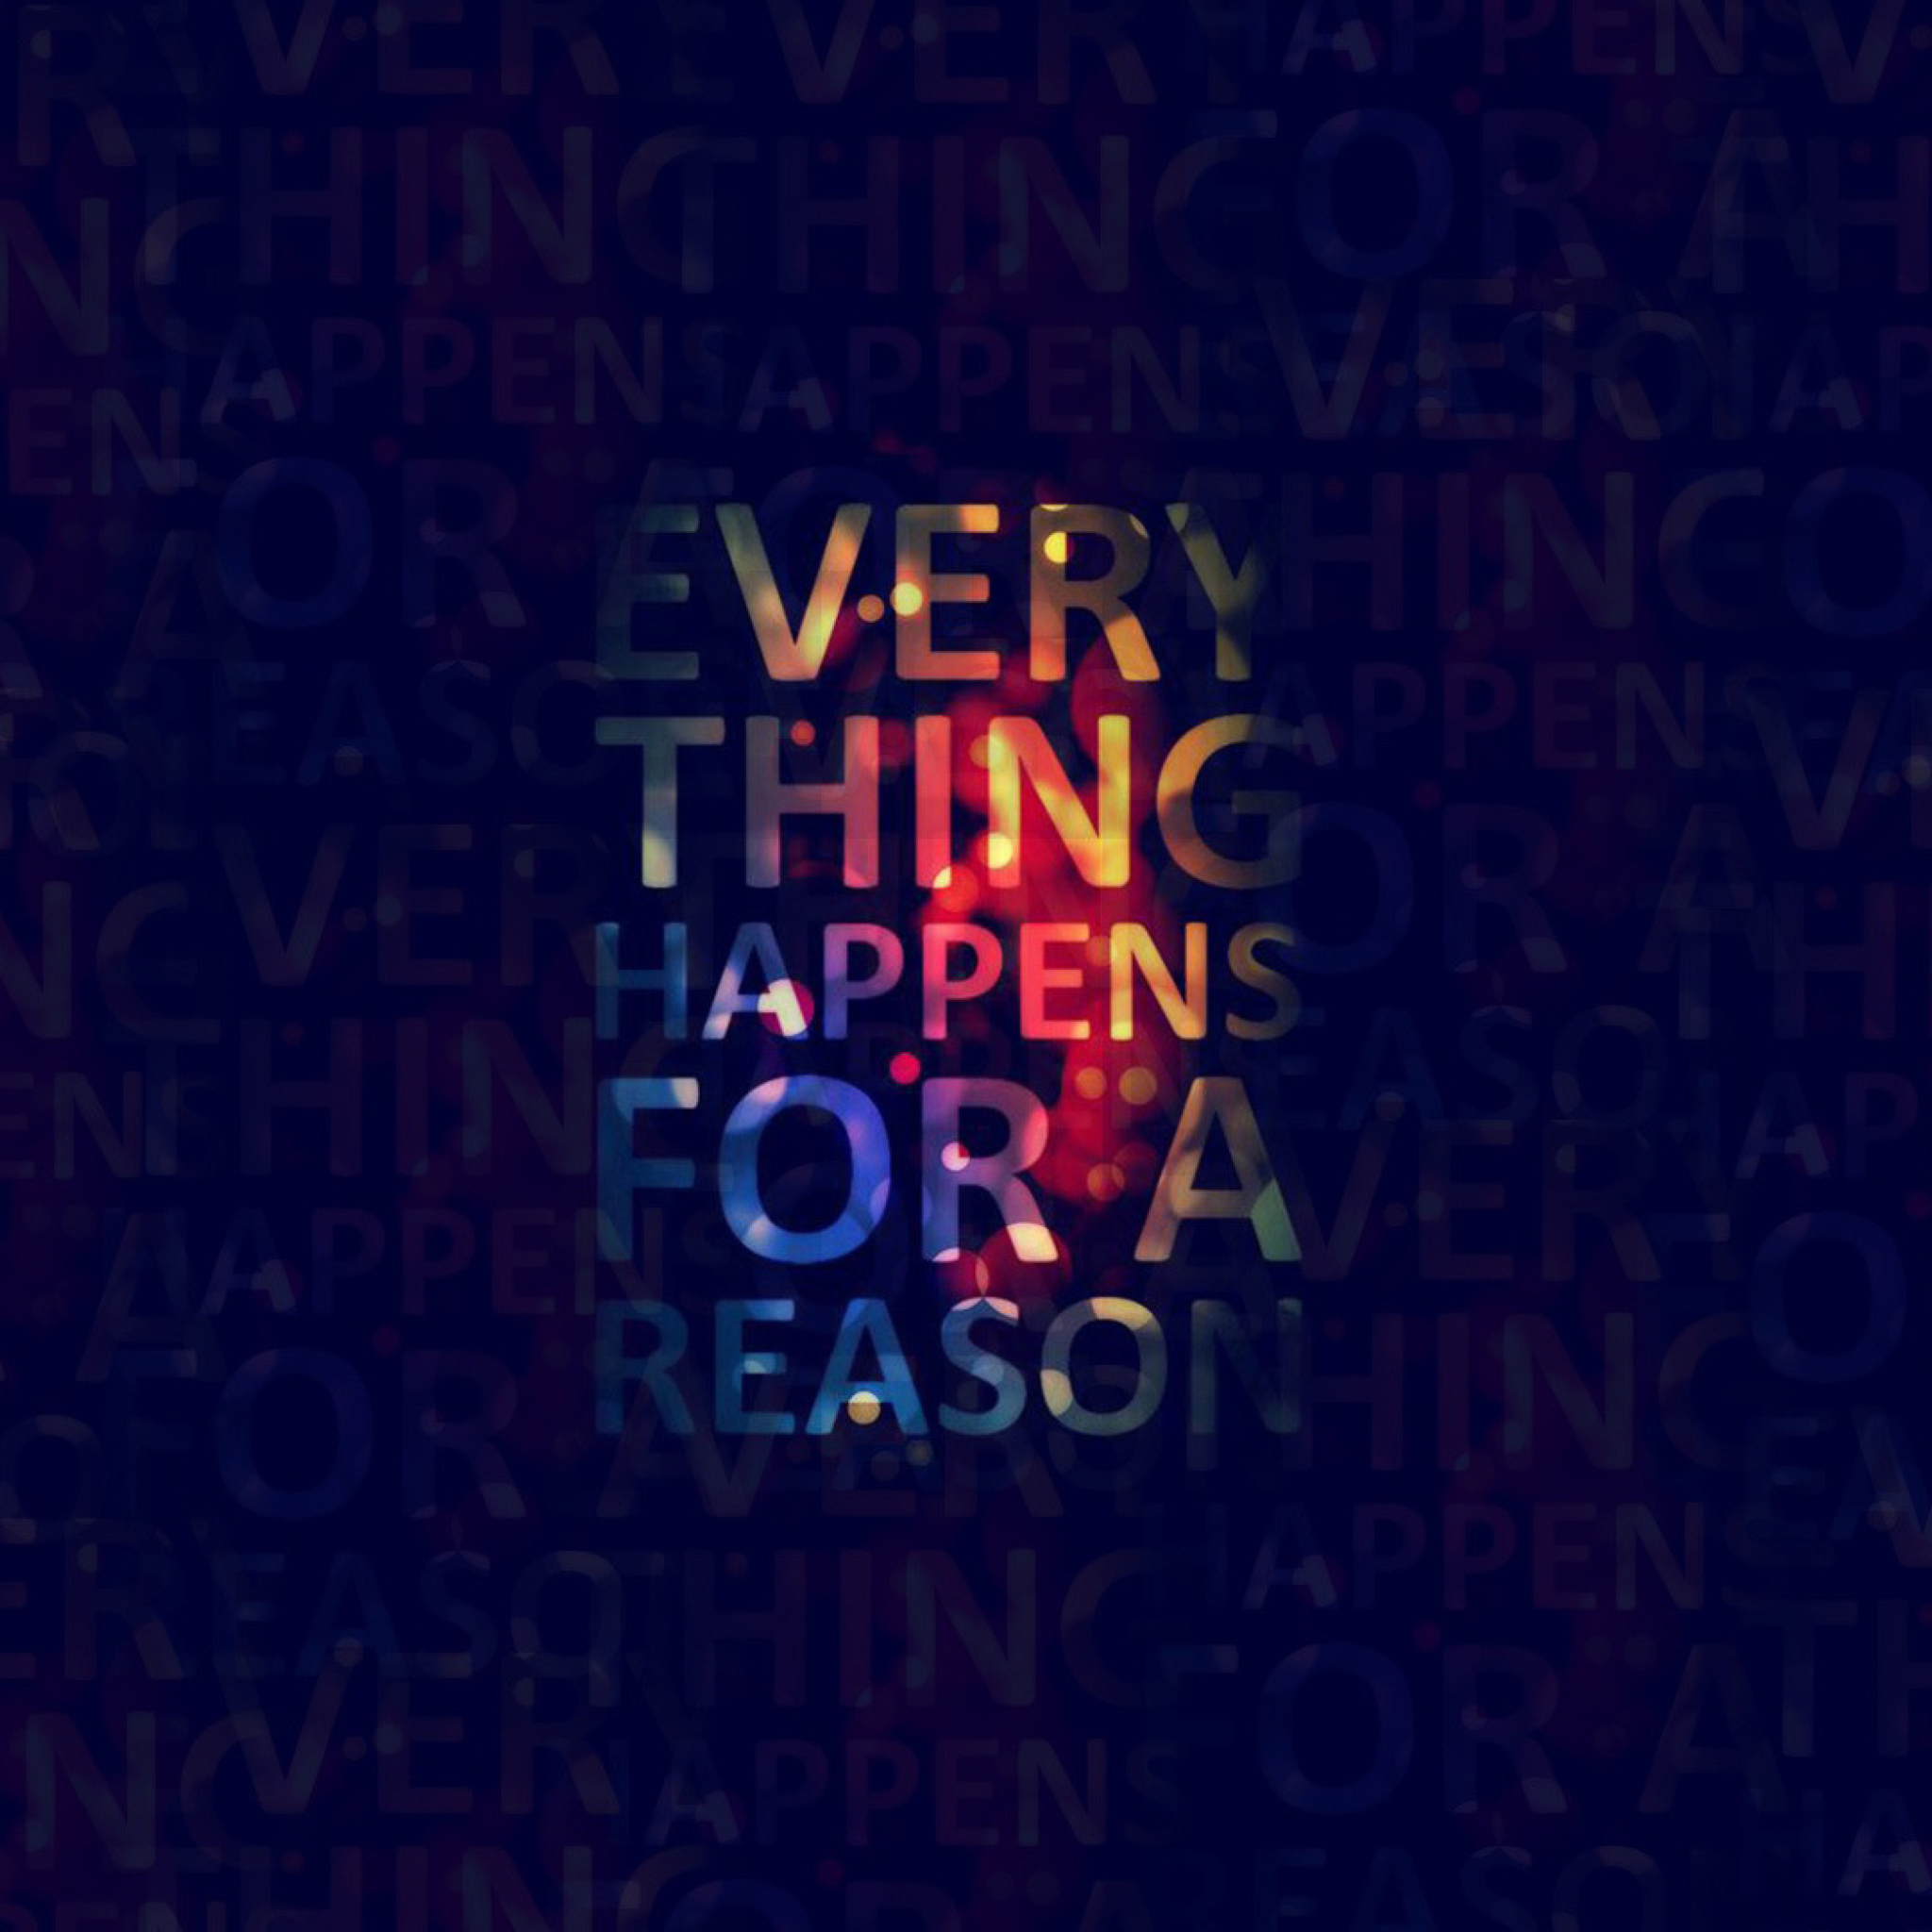 Everything Happens For A Reason wallpaper 2048x2048